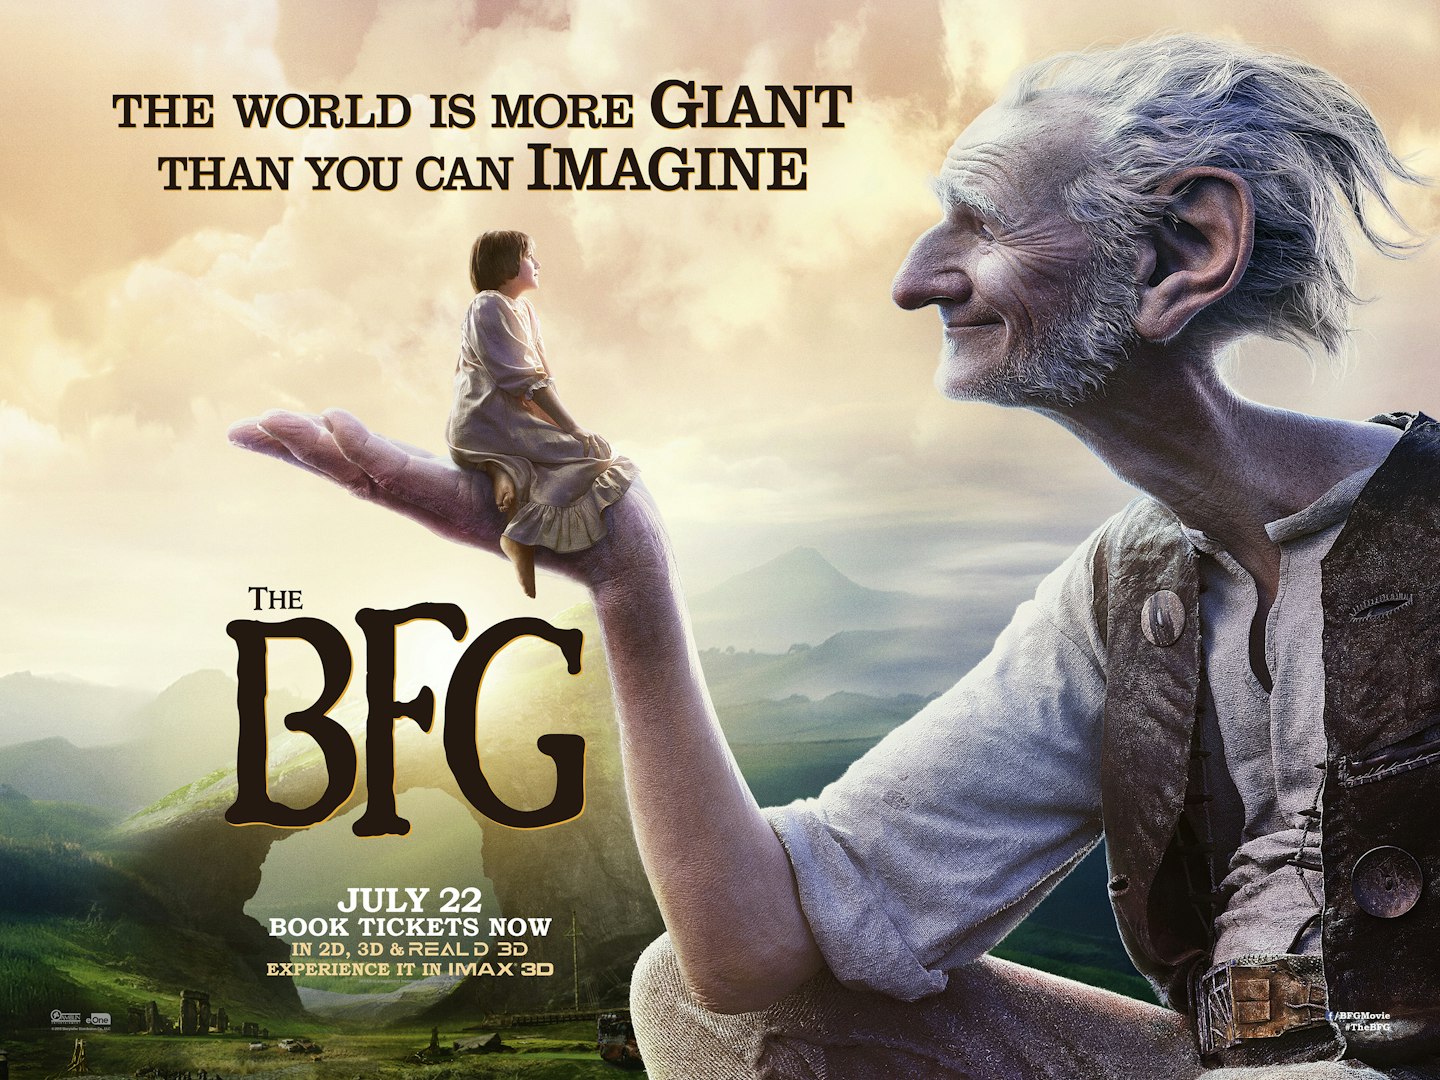 The BFG posters